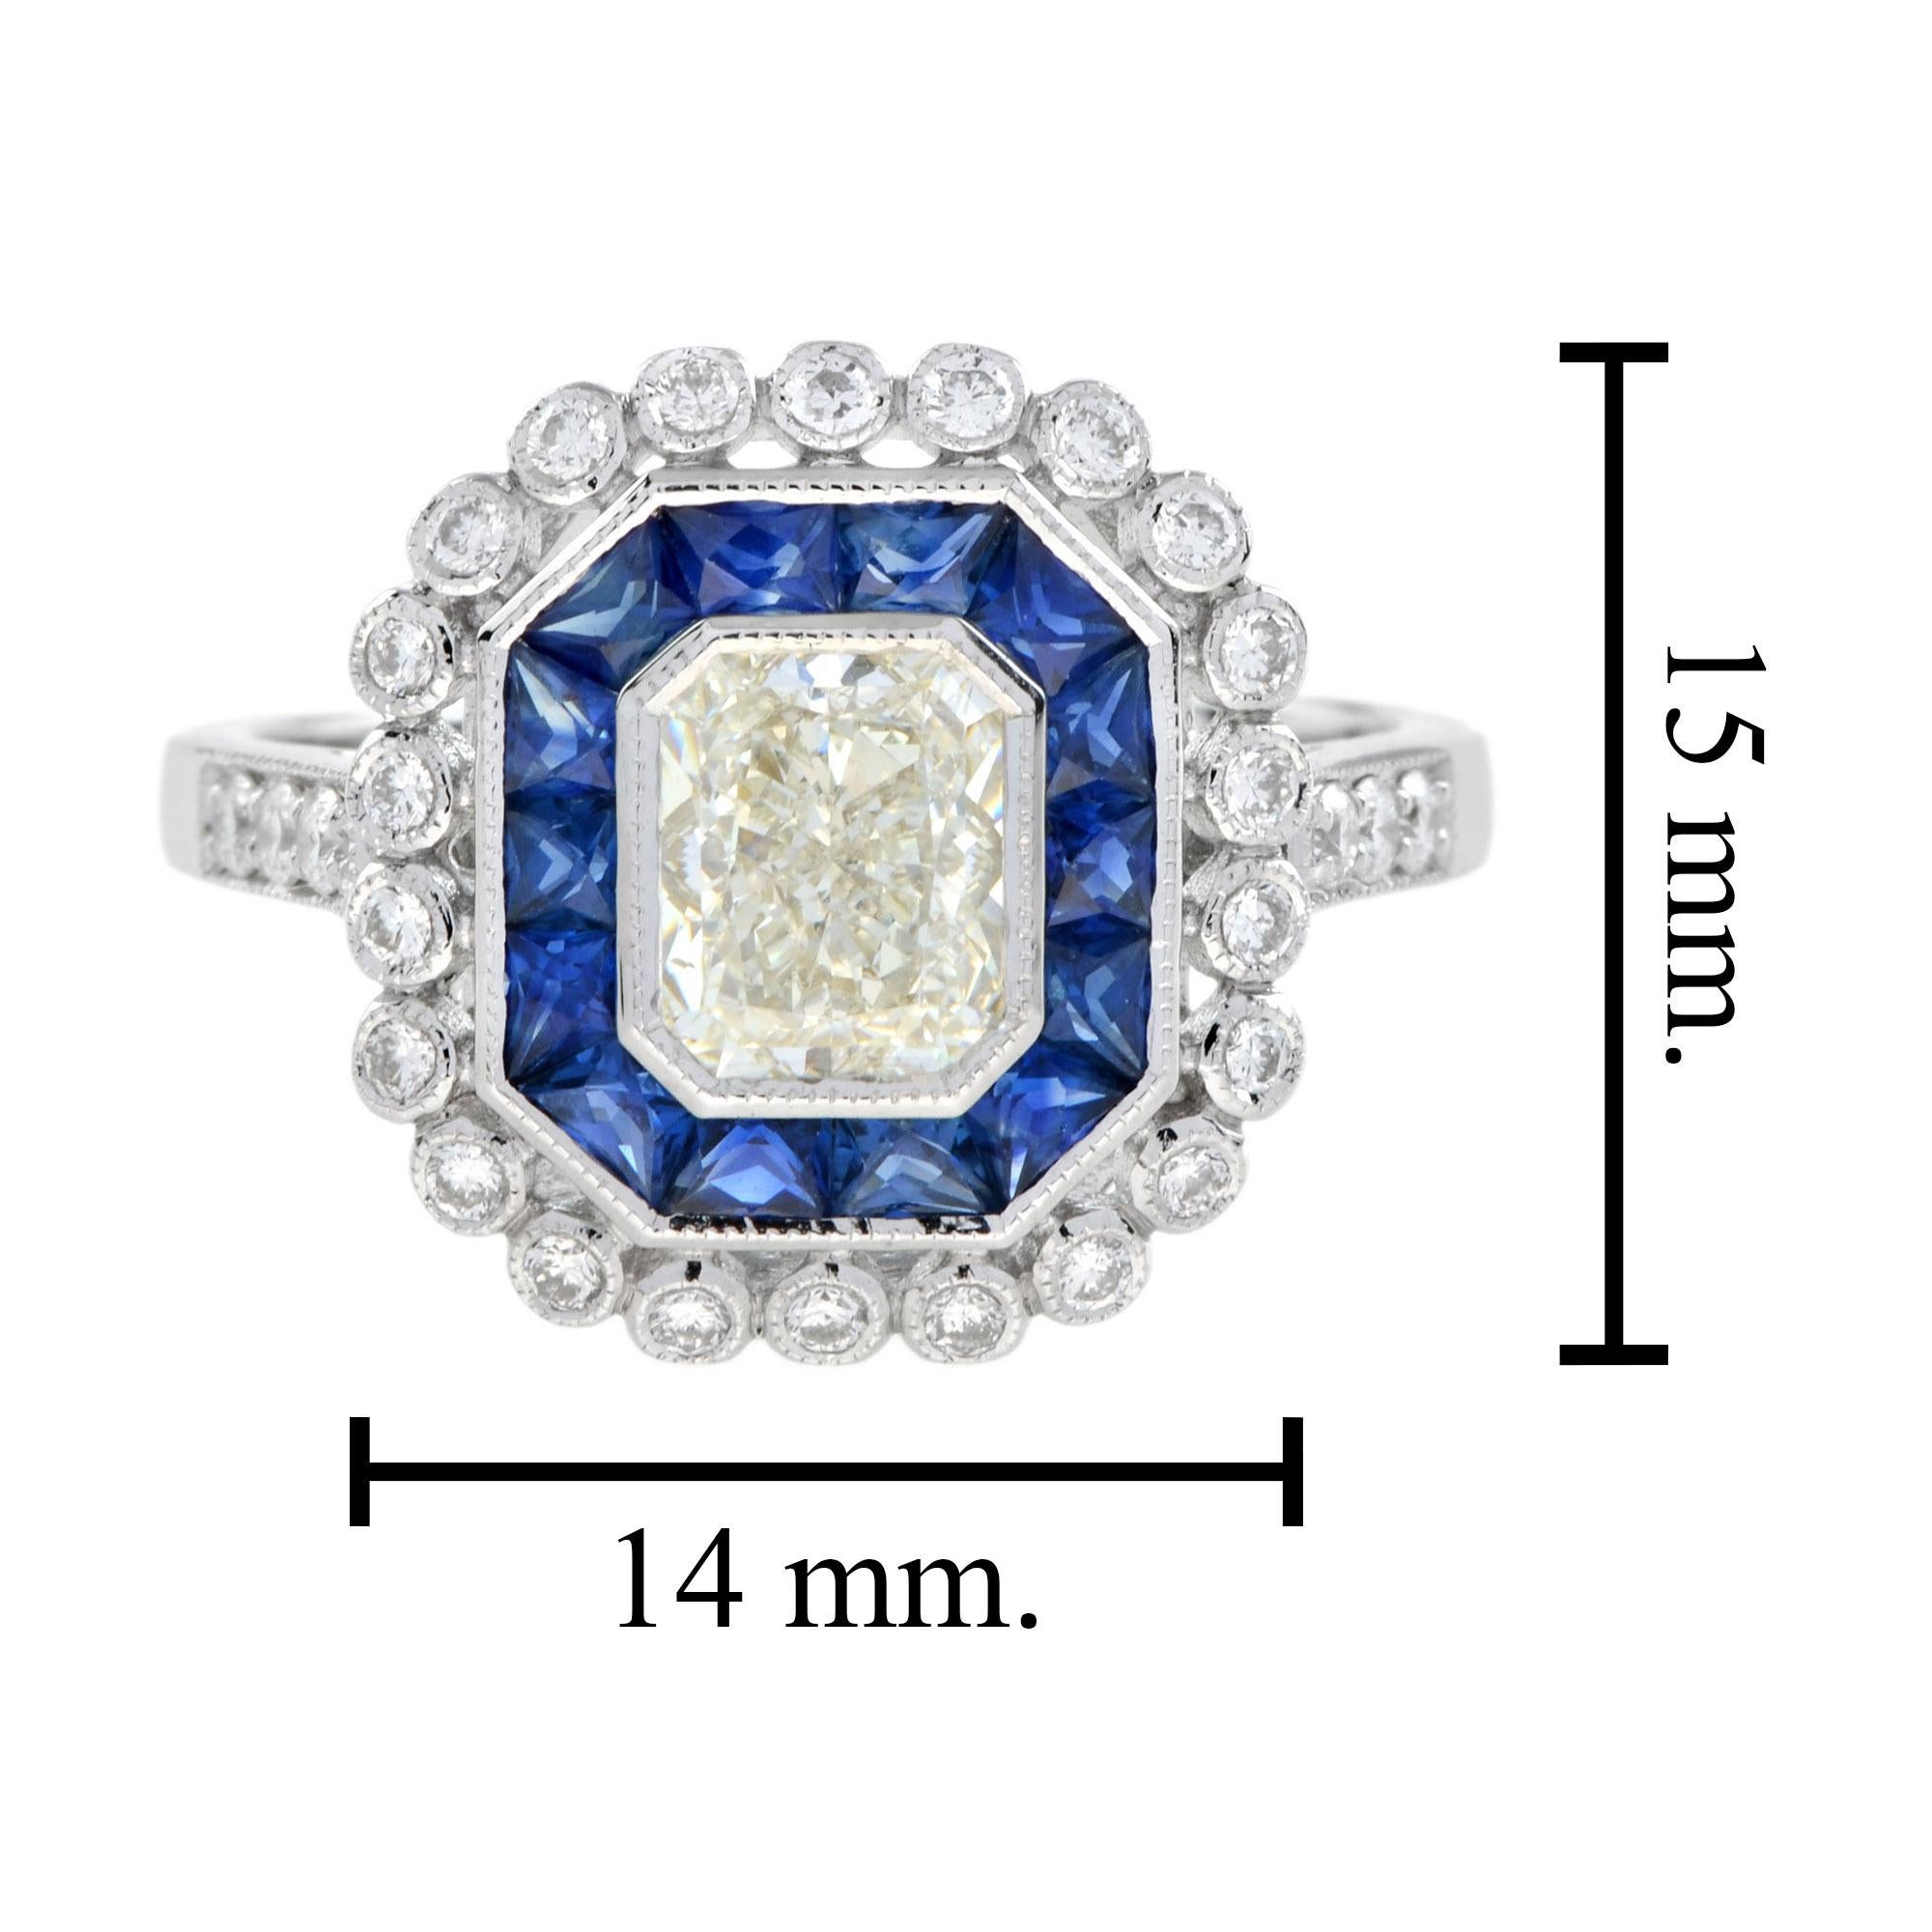 GIA 1.04 Ct. Diamond Sapphire Art Deco Style Engagement Ring in 18K White Gold For Sale 2